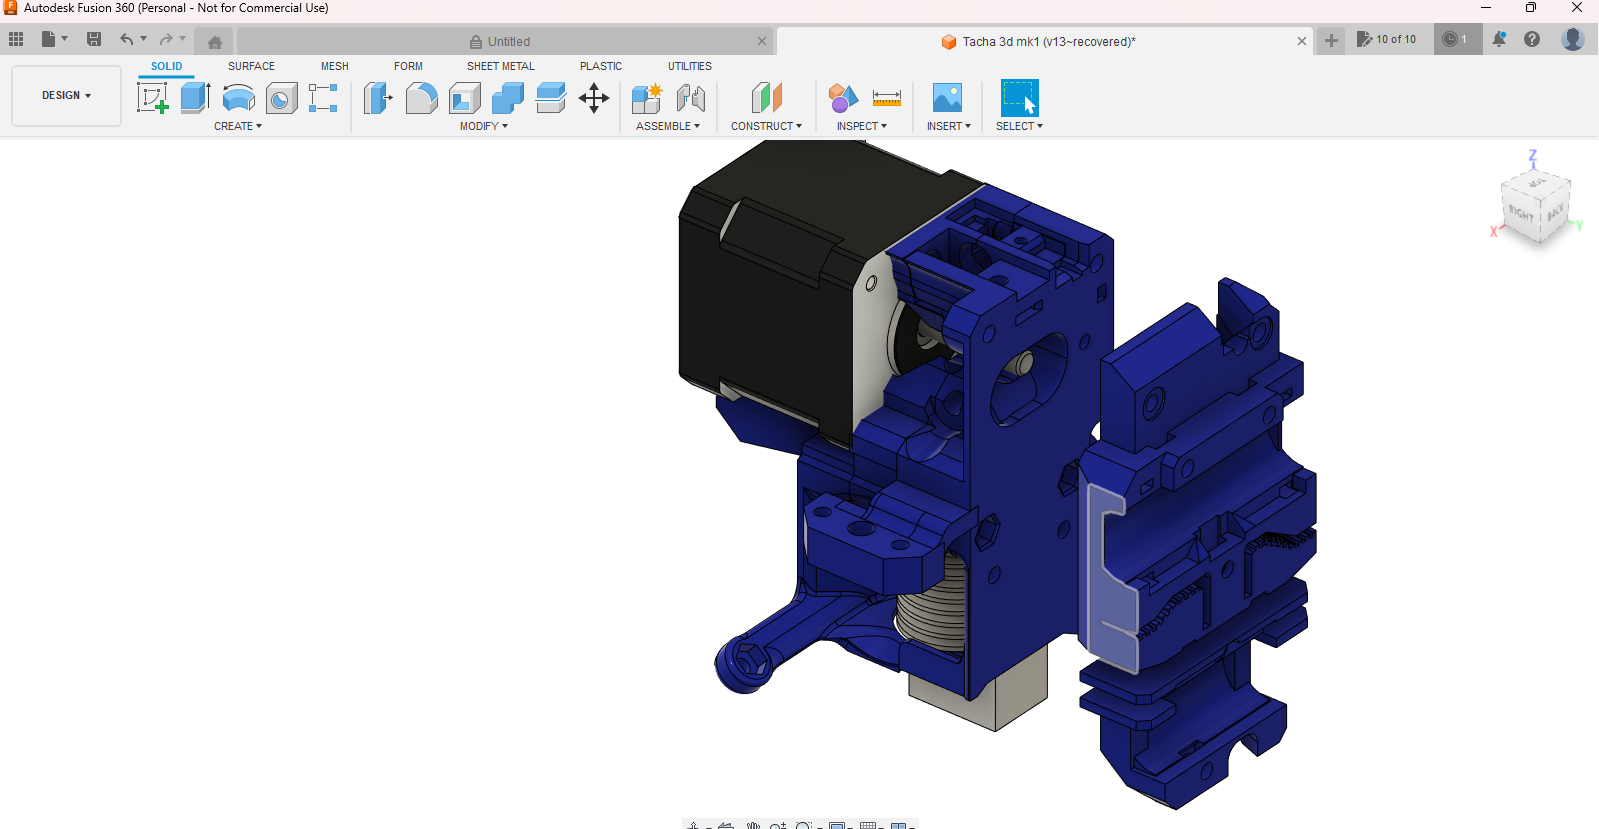 Autodesk Fusion 360 (Personal - Not for Commercial Use) 6_29_2023 10_04_41 PM.png